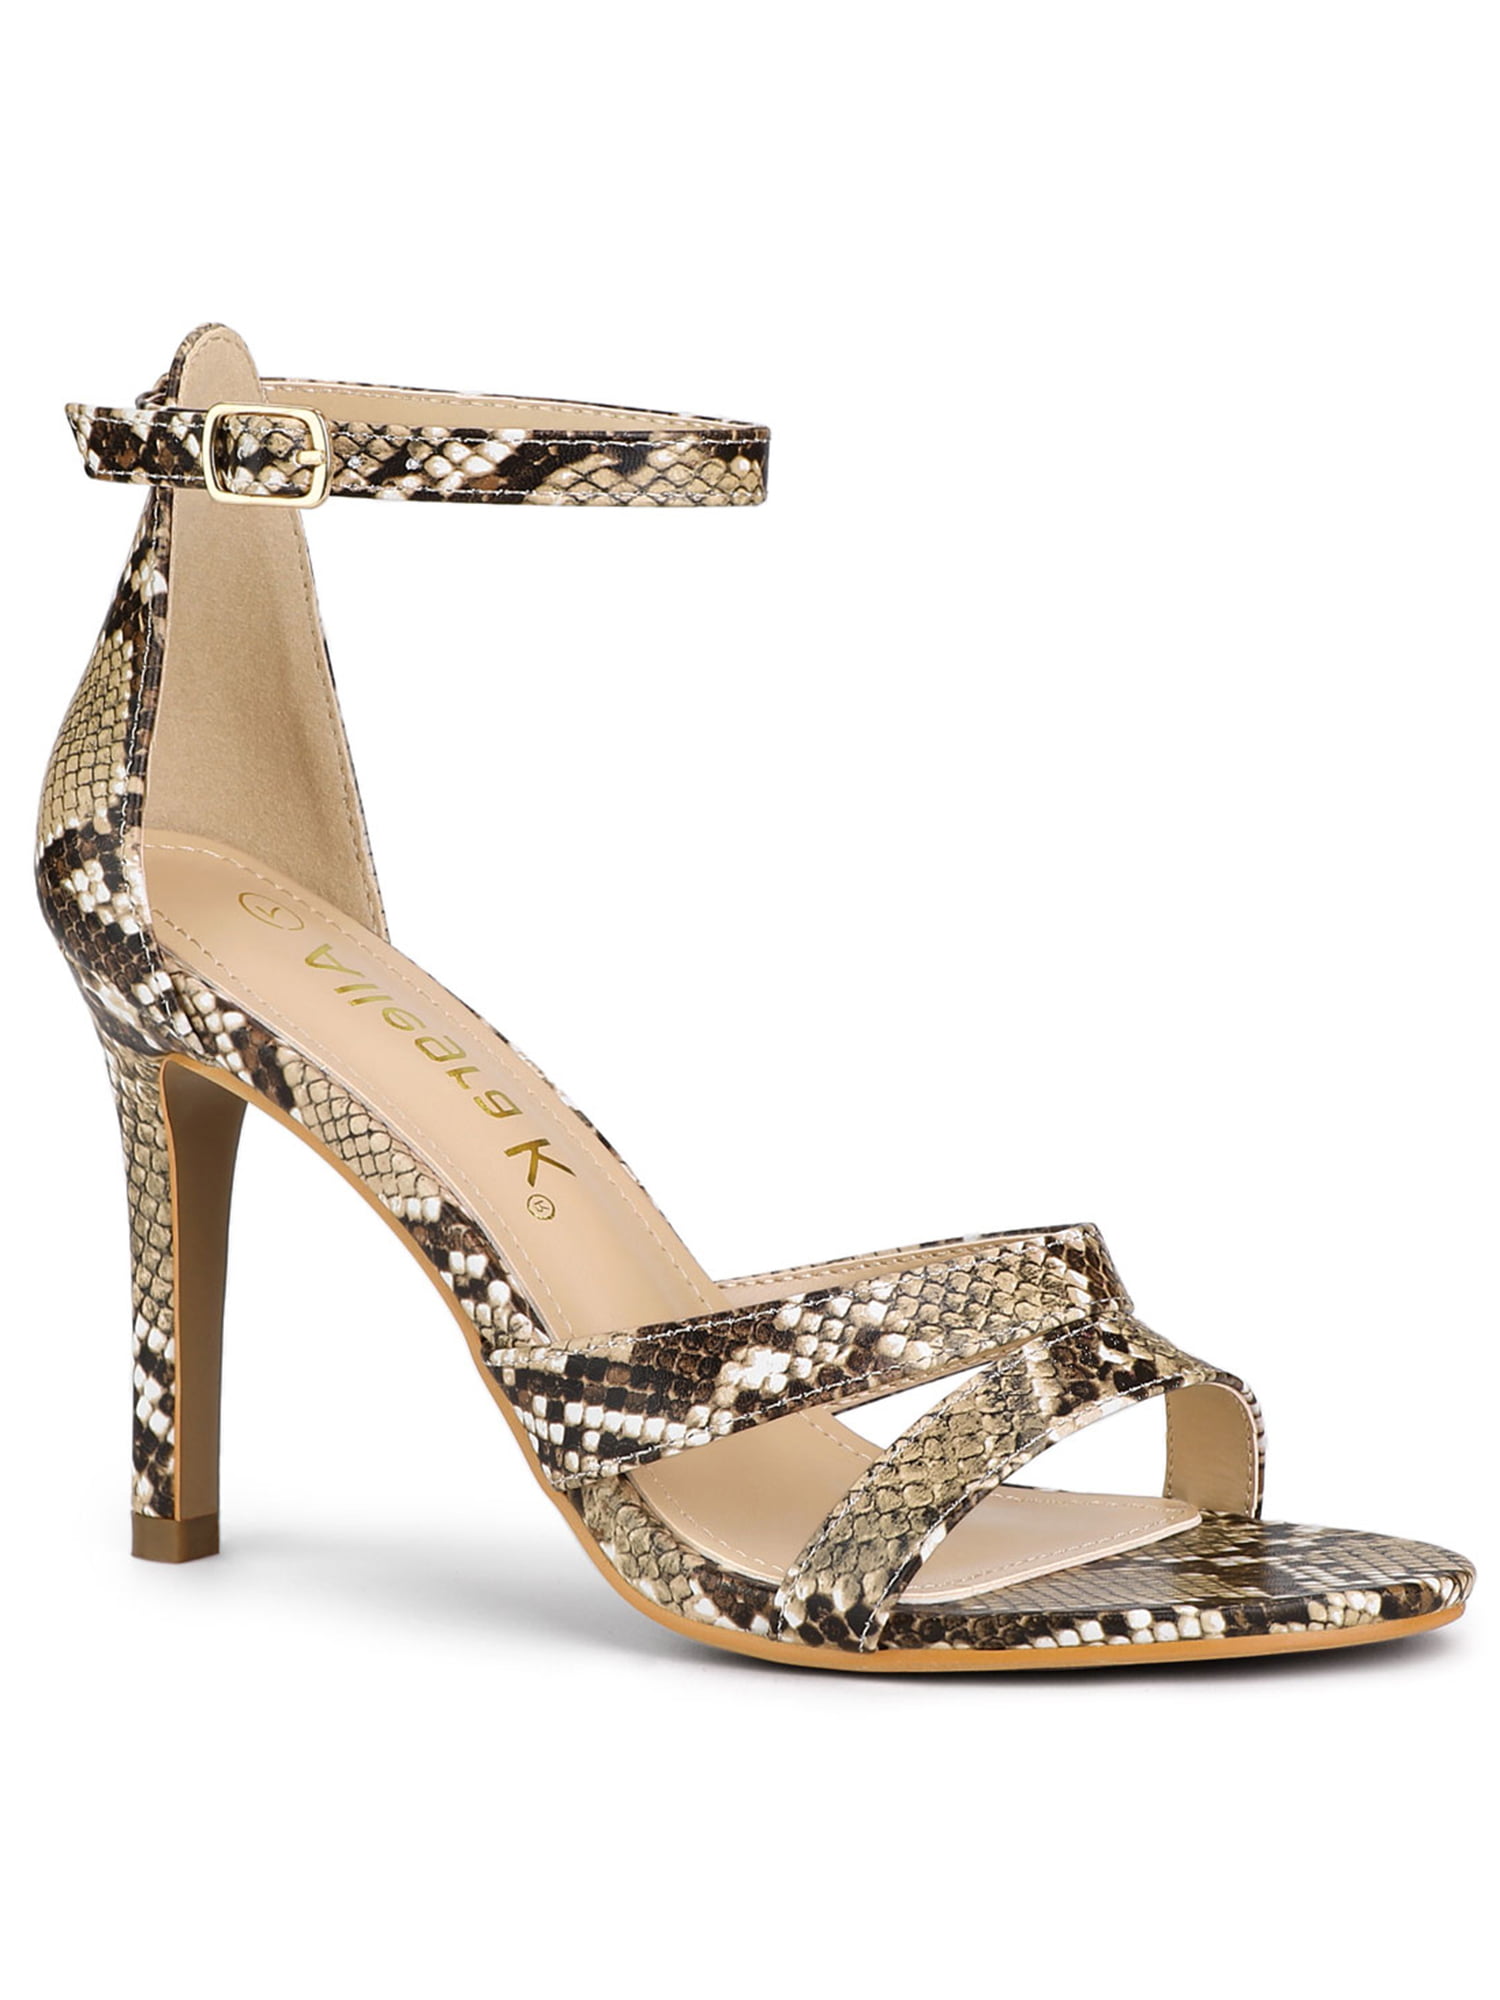 Details about   Women's Snake Pattern Strappy High Heels Sandals Stilettos Open Toe Casual Shoes